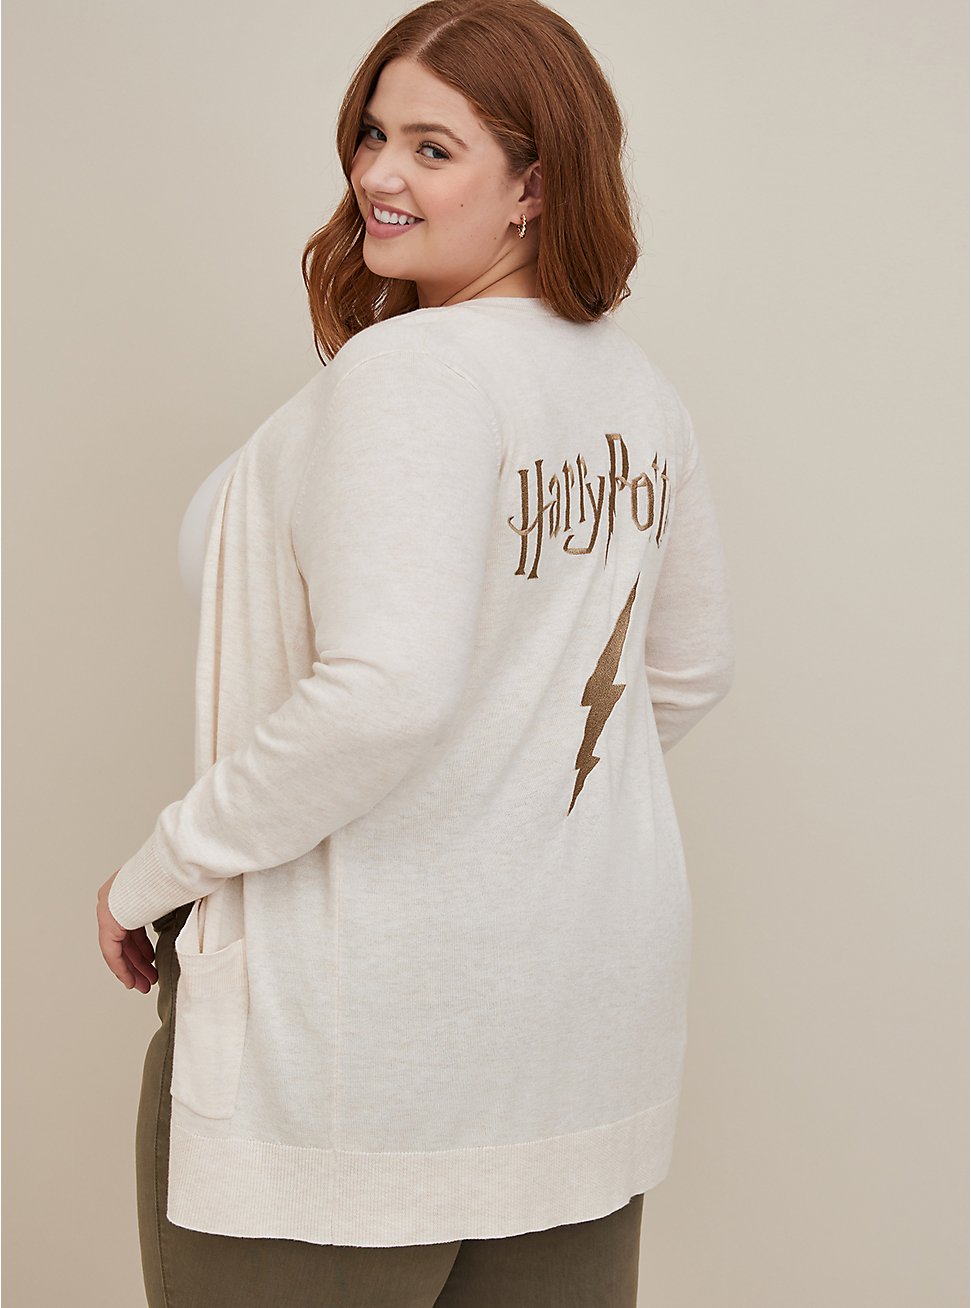 Plus Size Harry Potter Button Front Cardigan - Heather Oatmeal, IVORY, hi-res